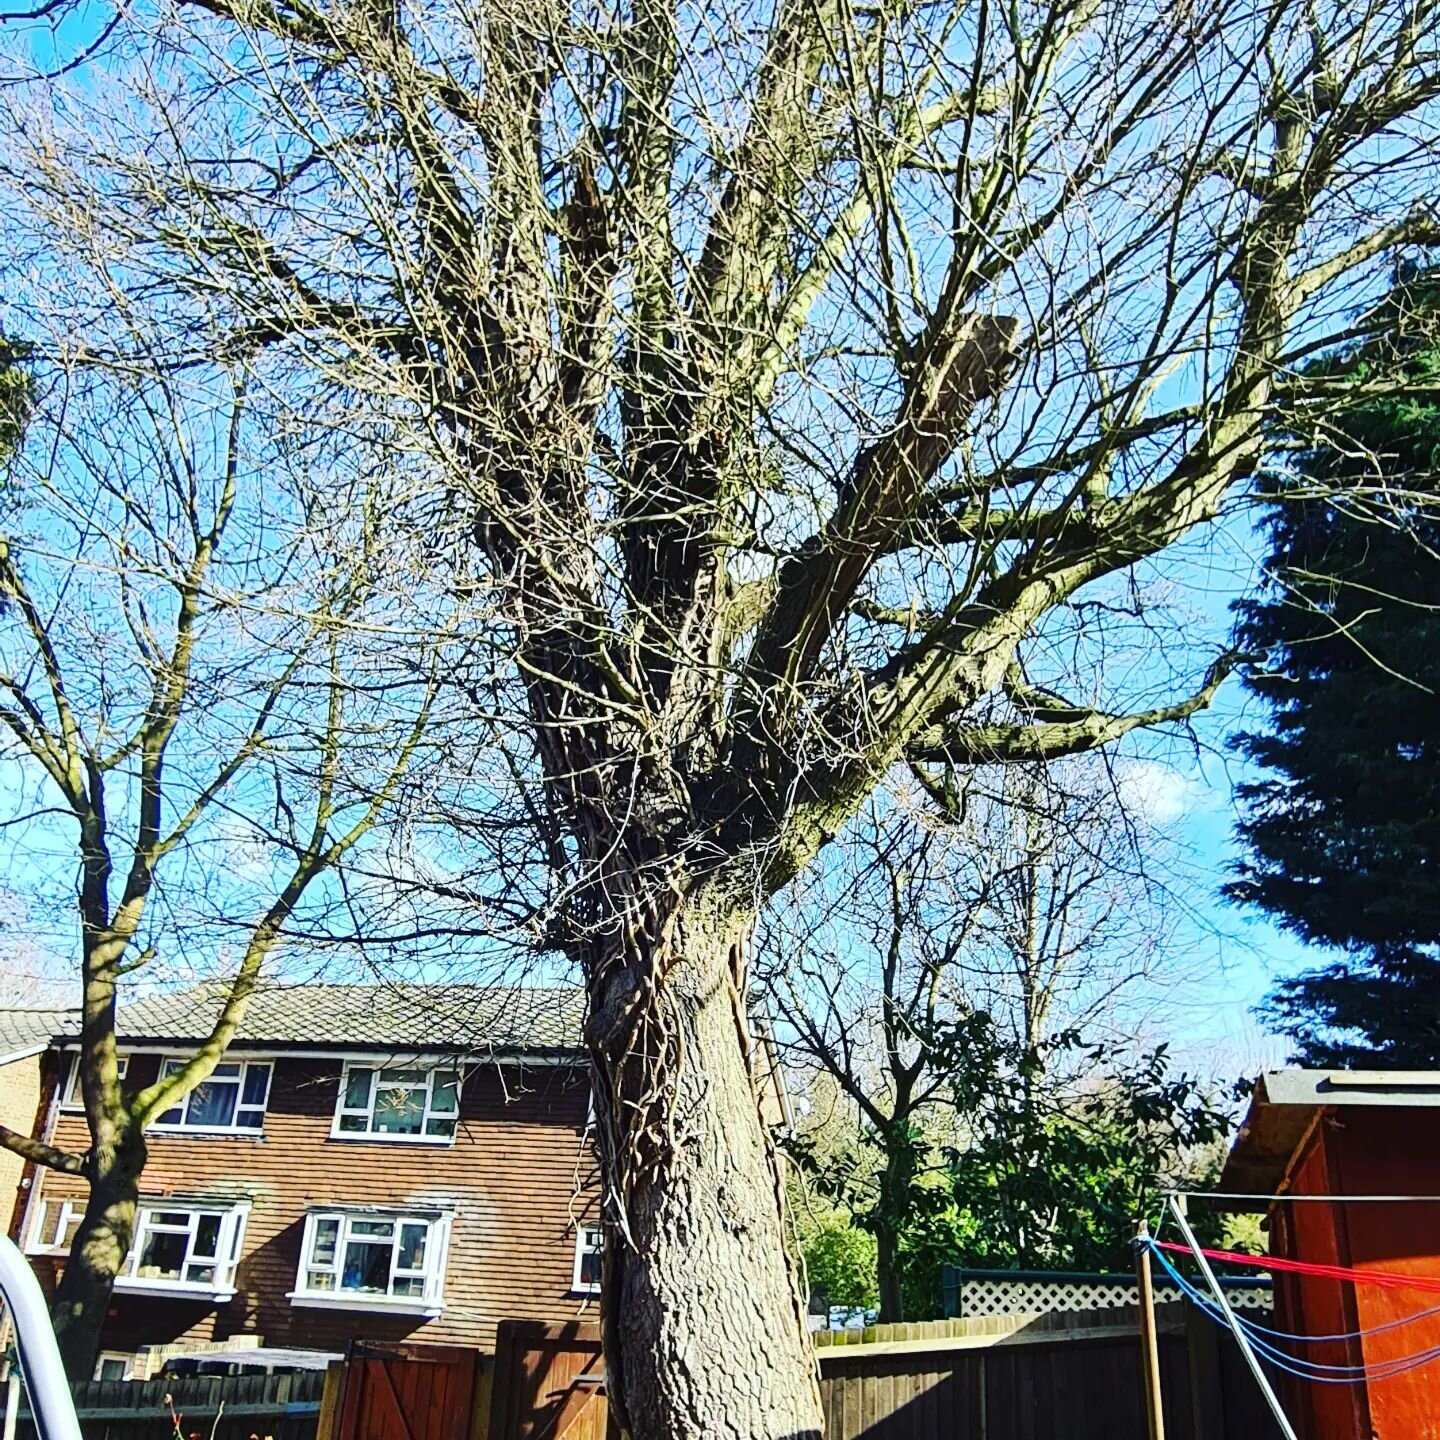 Heavy Oak 'reduction' in an awkward location. Our client explained that the previous company cut off one of the low limbs in one piece (you can see the tear cut on the underside of a large limb in the photos) and ended up destroying 3 fence lines, an